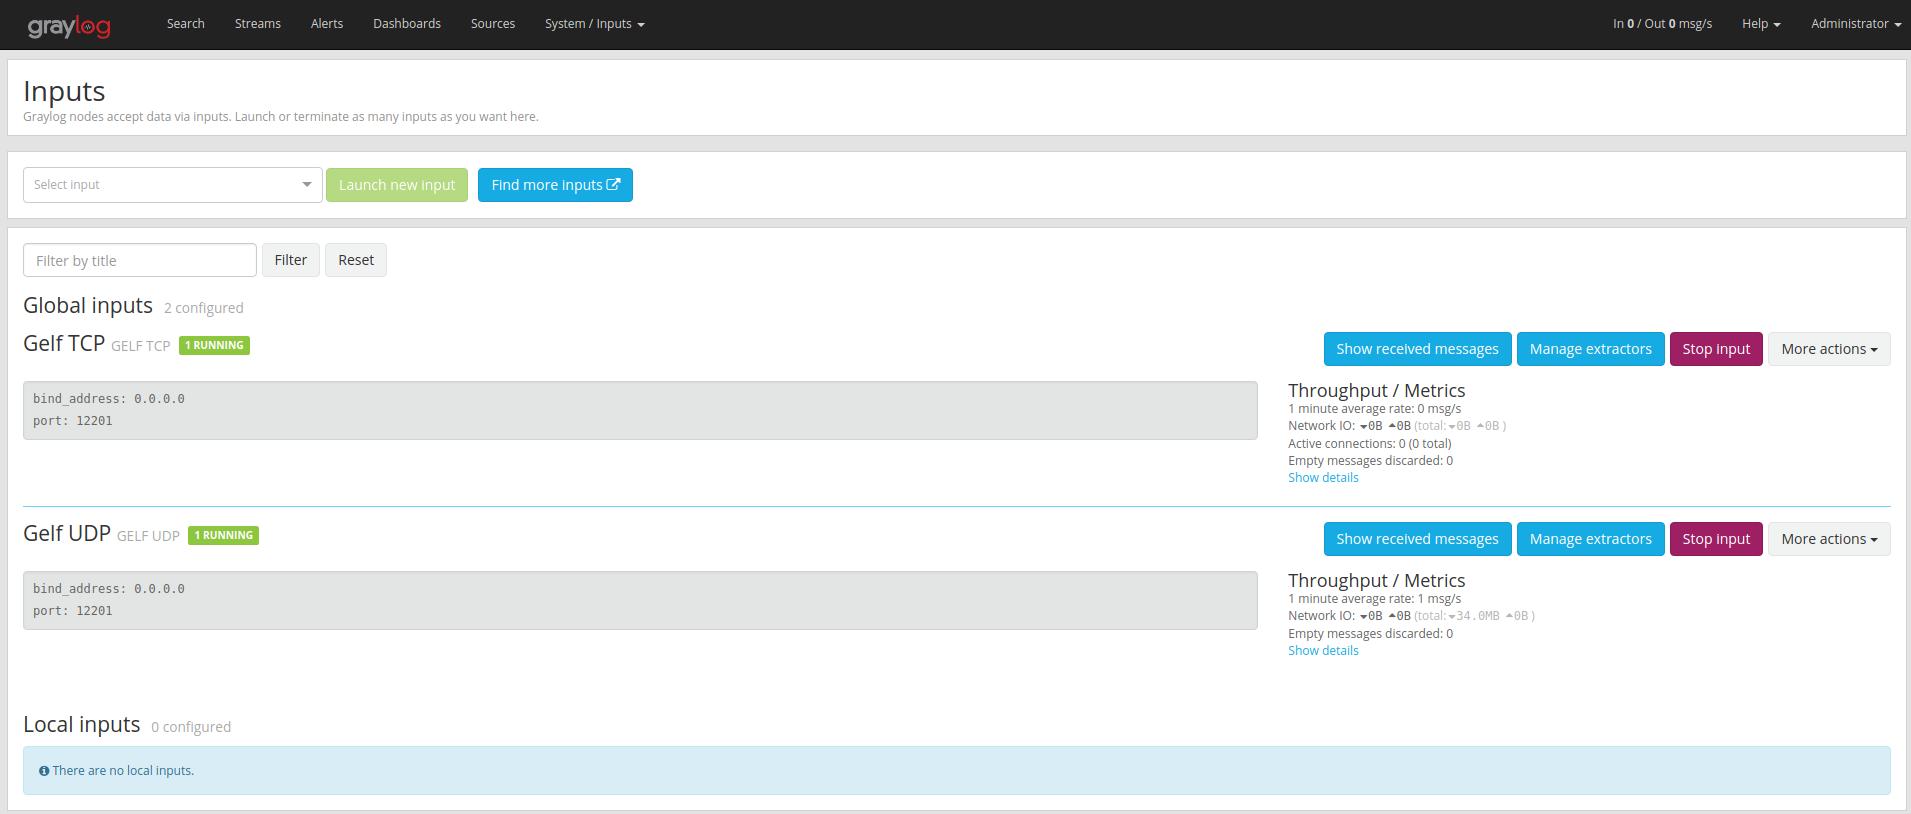 images/download/attachments/61479119/graylog-inputs.png